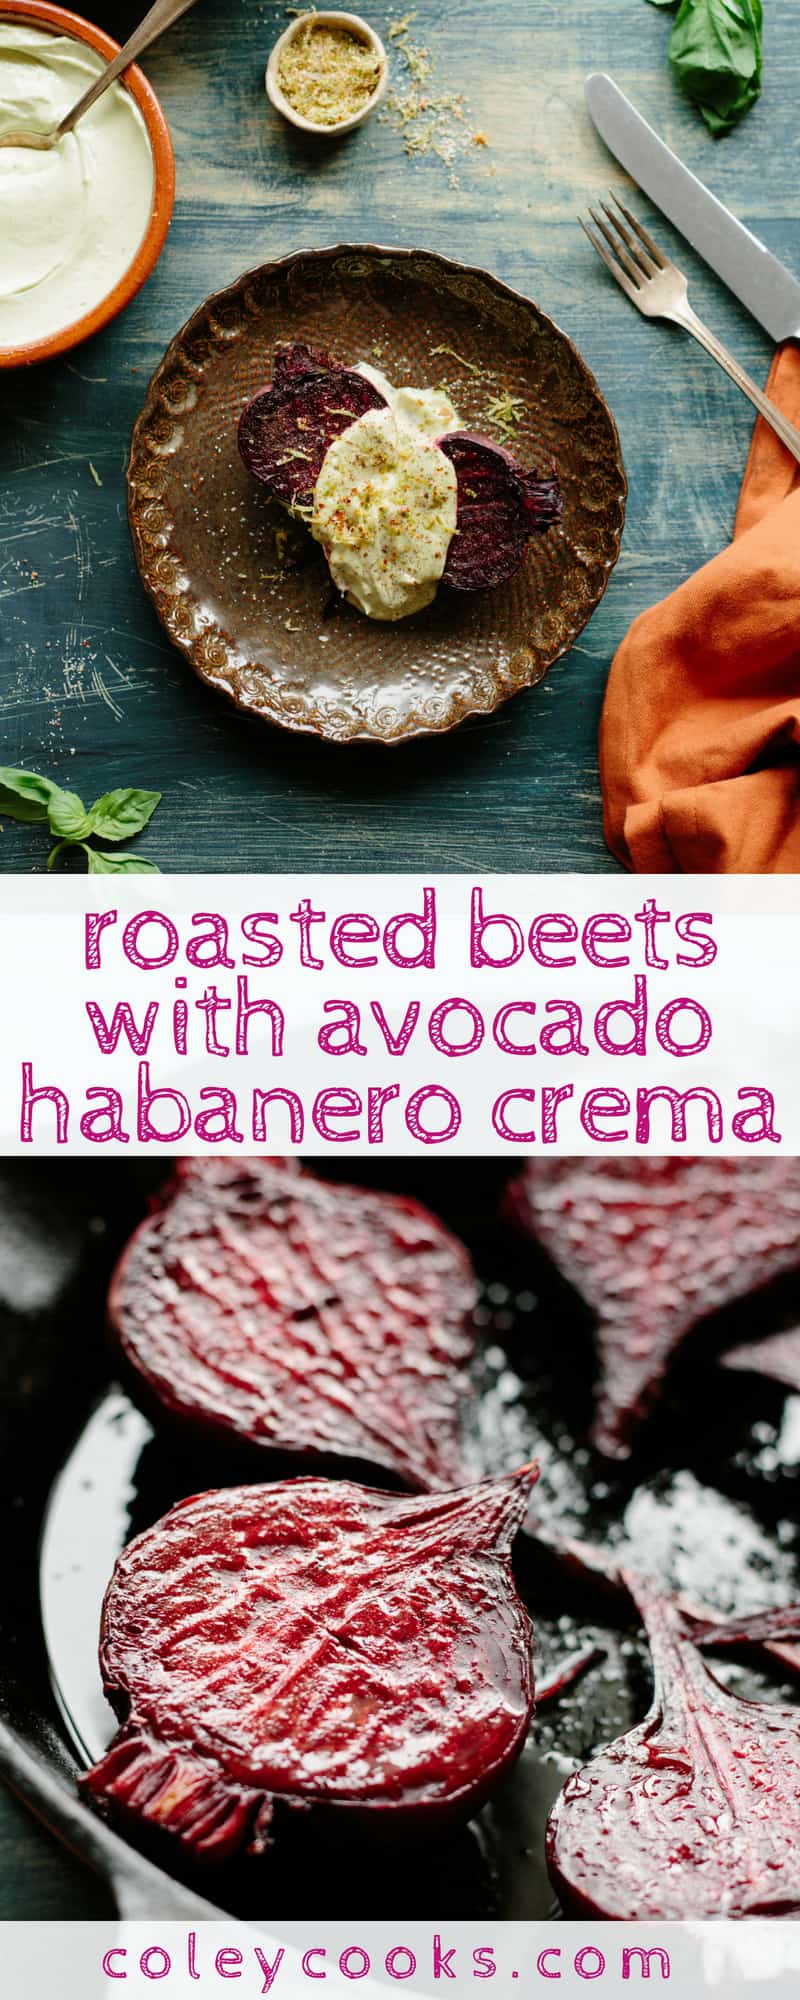 ROASTED BEETS with AVOCADO HABANERO CREMA | From Hartwood in Tulum, Mexico! This easy beet recipe is outrageously delicious. A wonderful side for grilled dinners. #recipe #sides #Tulum #hartwood #beets | ColeyCooks.com